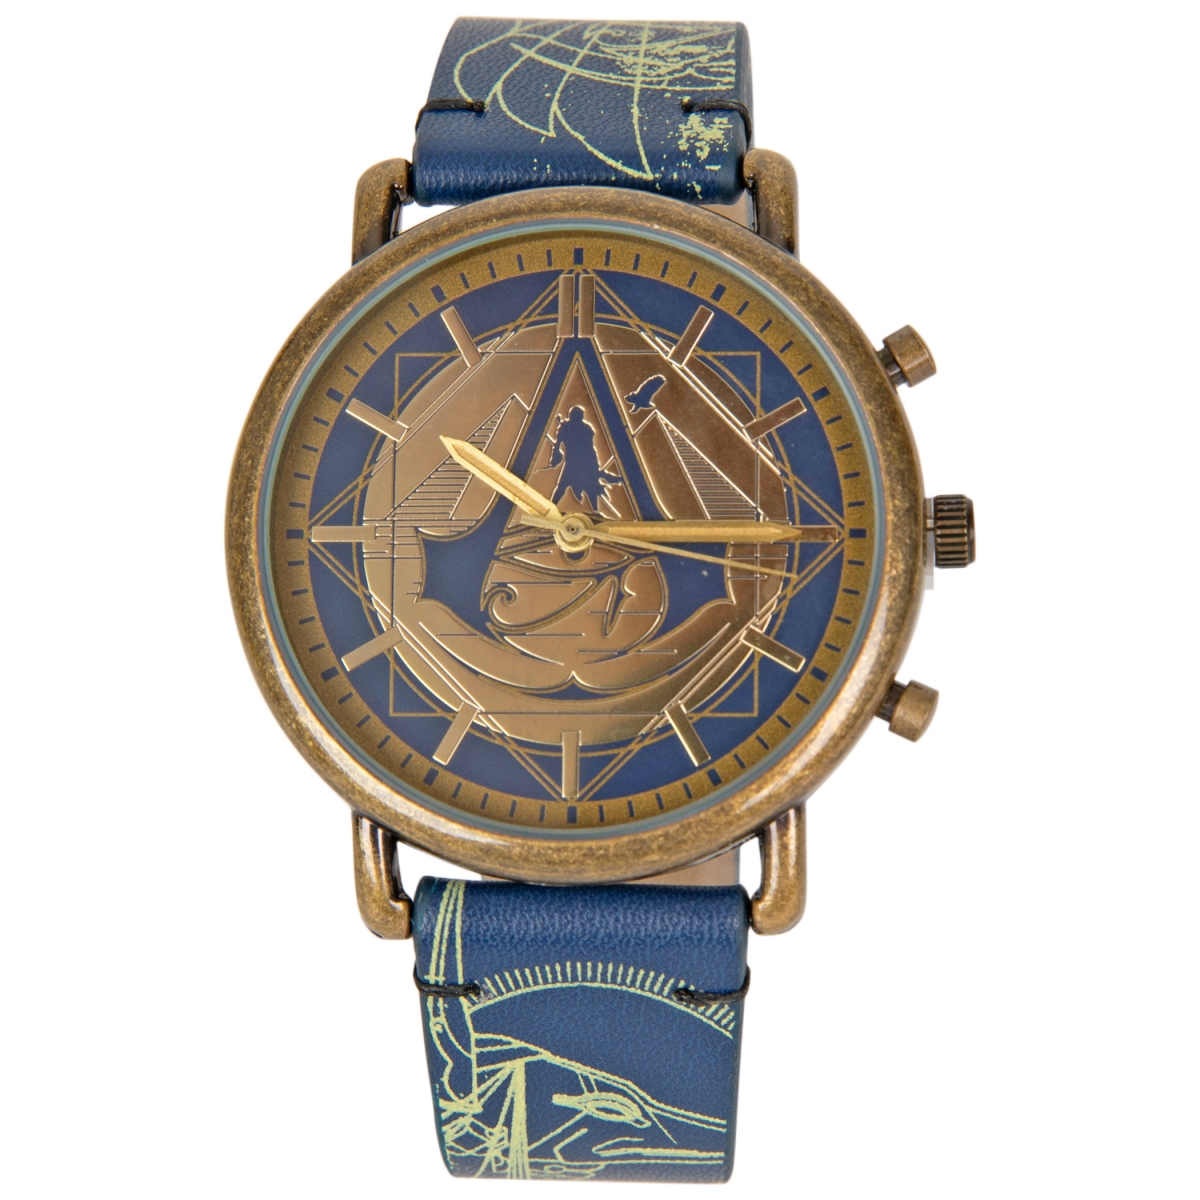 Picture of Assassins Creed 837952 Assassins Creed the Assassins Insignia Gold Face Wrist Watch